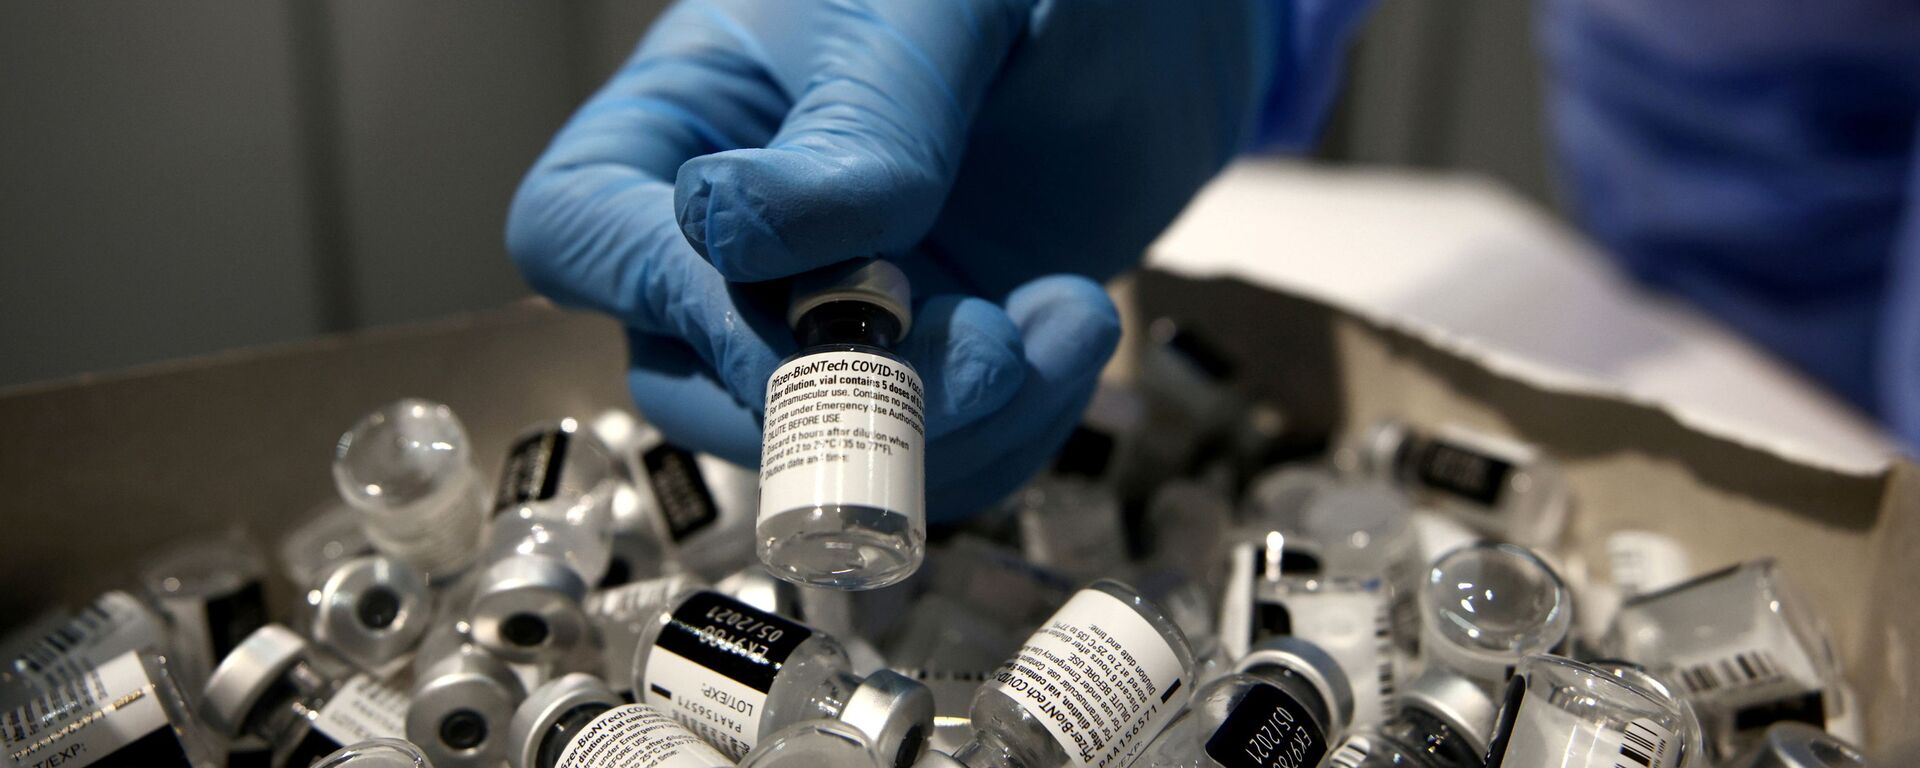 FILE PHOTO: A nurse puts a used Pfizer-BioNTech COVID-19 vaccine vial in a disposal box with empty vials at Messe Wien Congress Center, which has been set up as a coronavirus disease (COVID-19) vaccination centre, in Vienna, Austria February 7, 2021 - Sputnik International, 1920, 01.09.2021